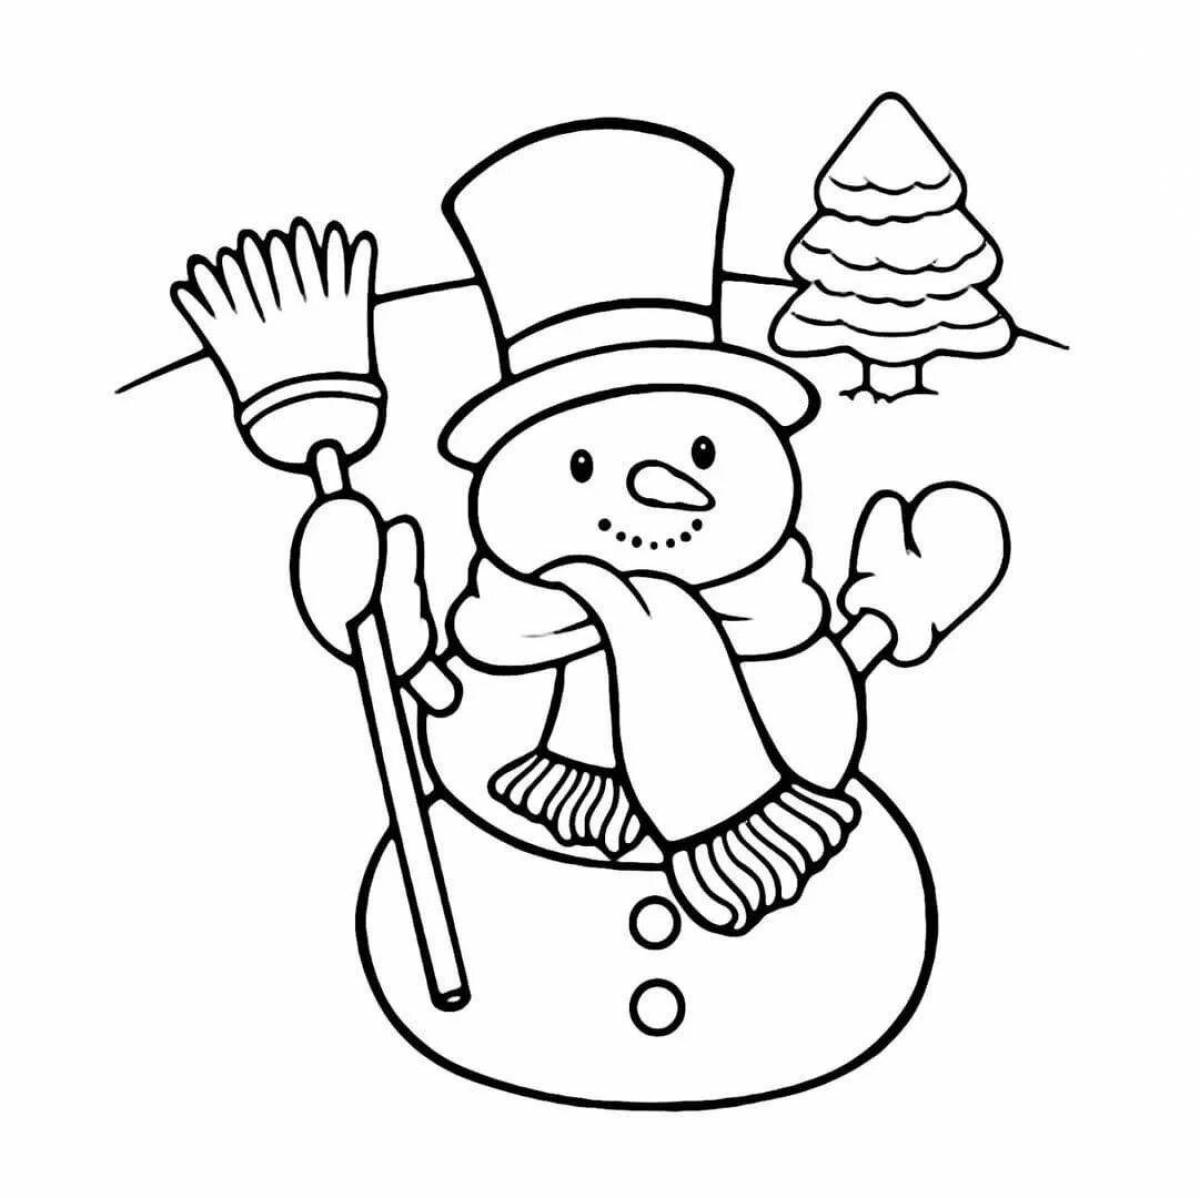 Amazing snowman coloring book for kids 2 3